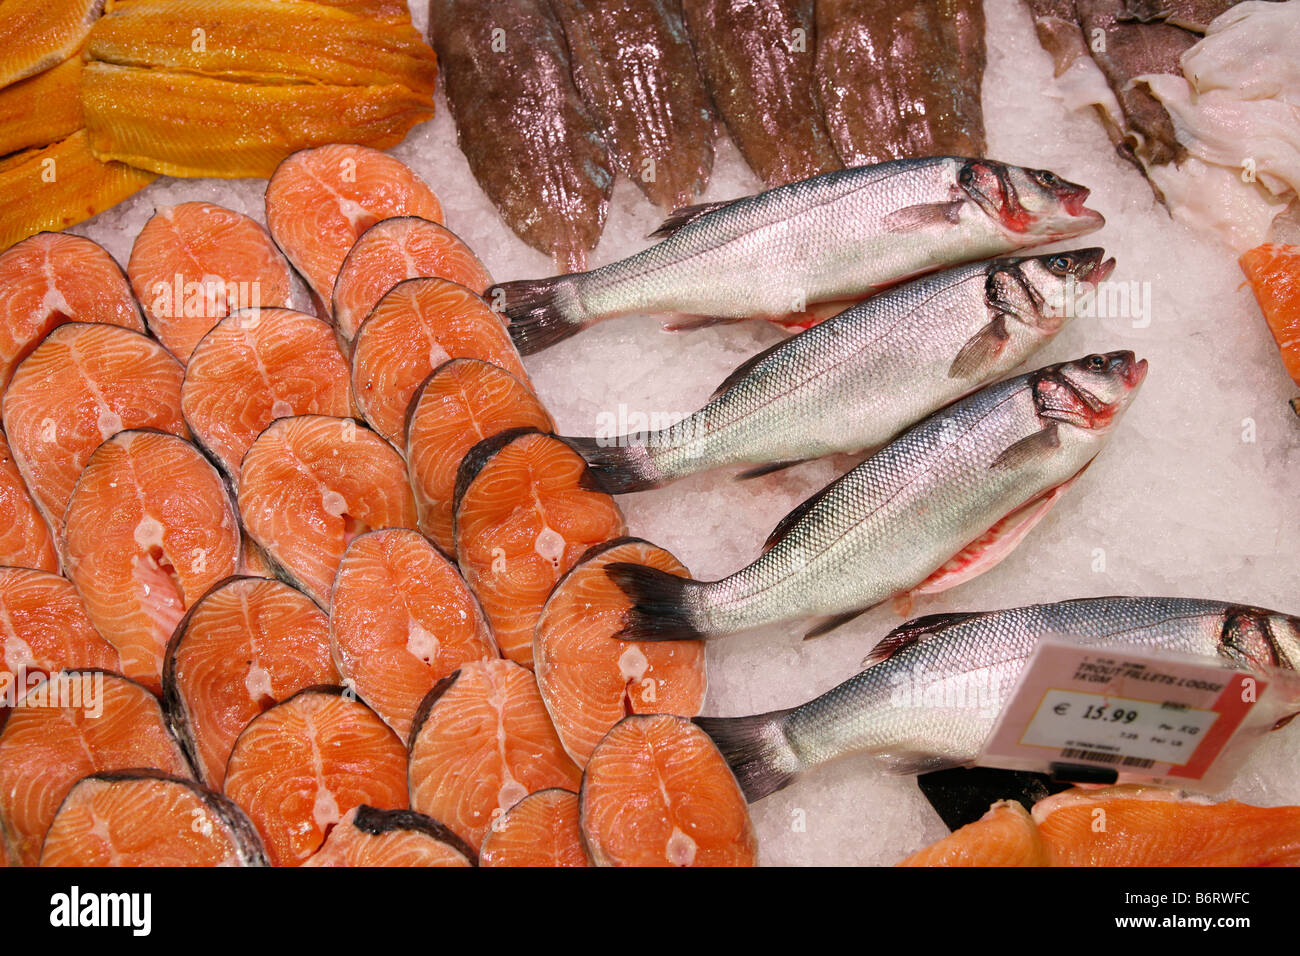 fresh fish on ice in a supermarket; whole trout and fillets of salmon Stock Photo